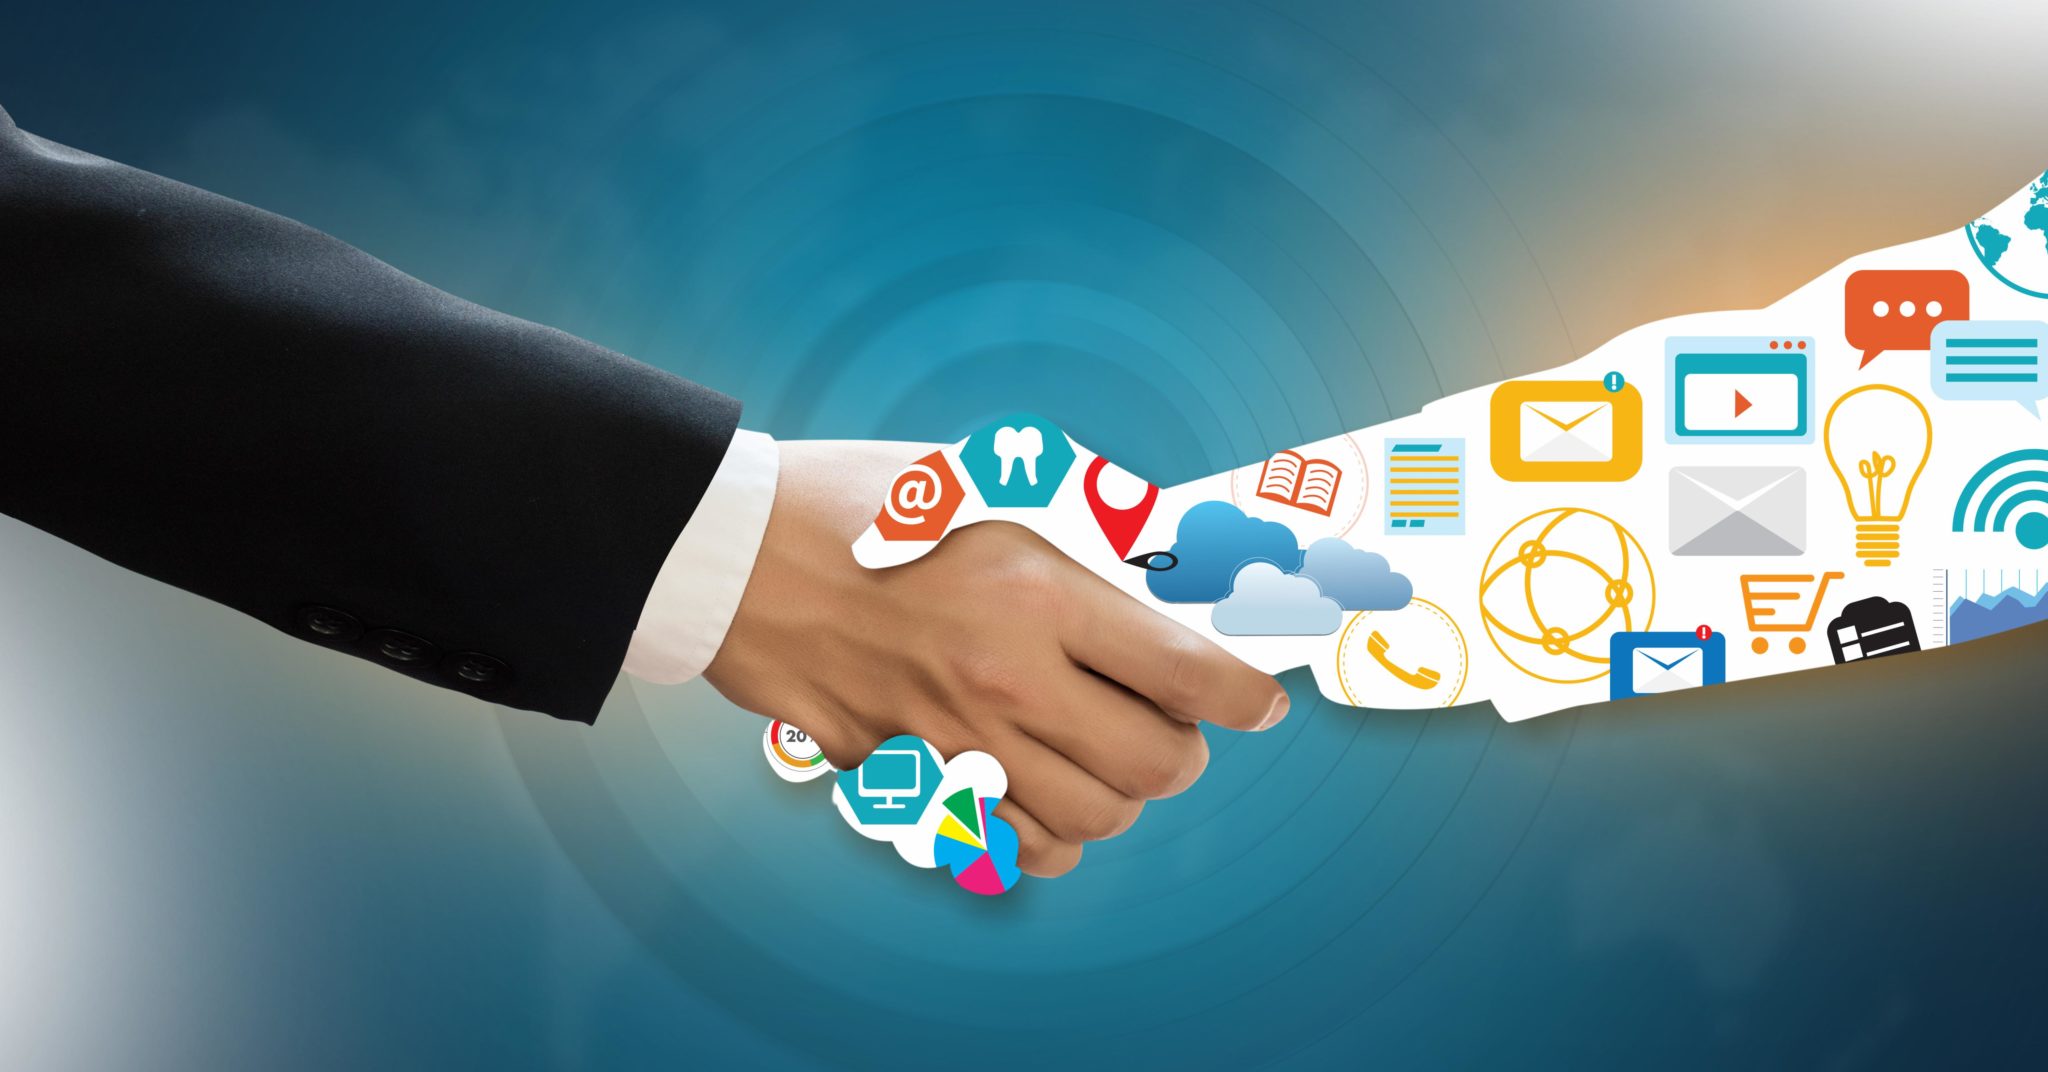 Two people shaking hands, one in a business suite and one's arm is made up of social icons and marketing tools.